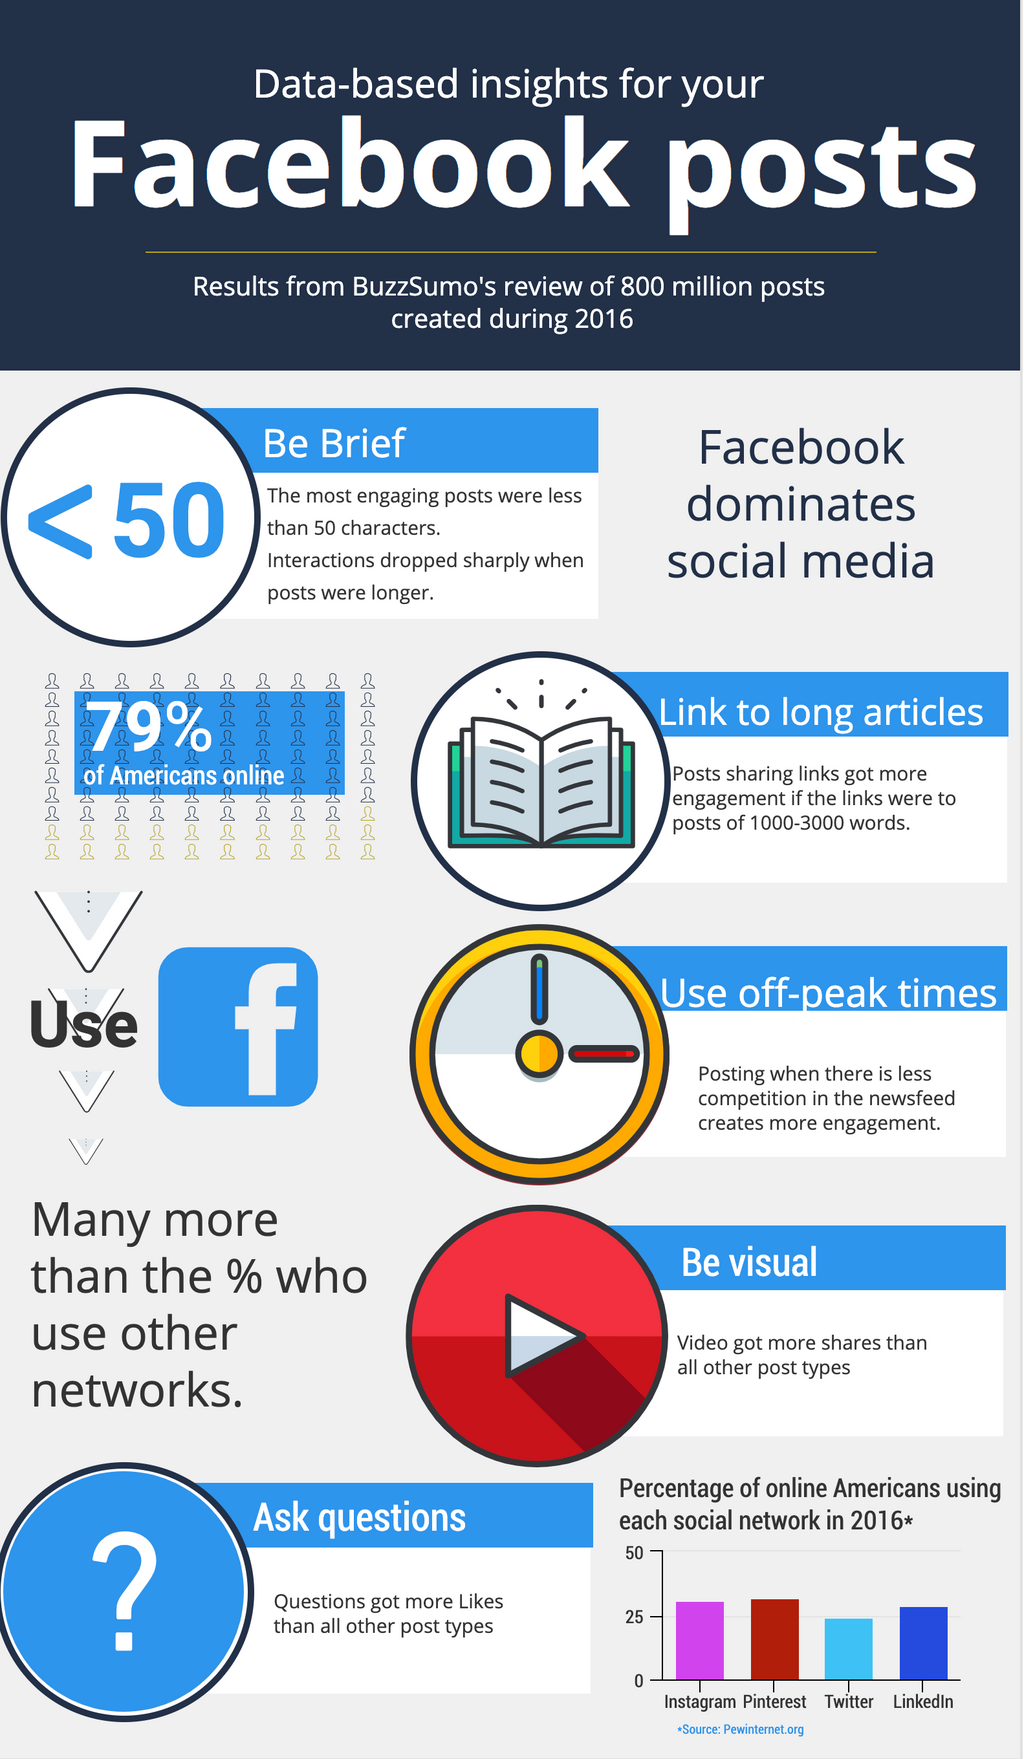 why have engaging posts? Find out more about how your facebook